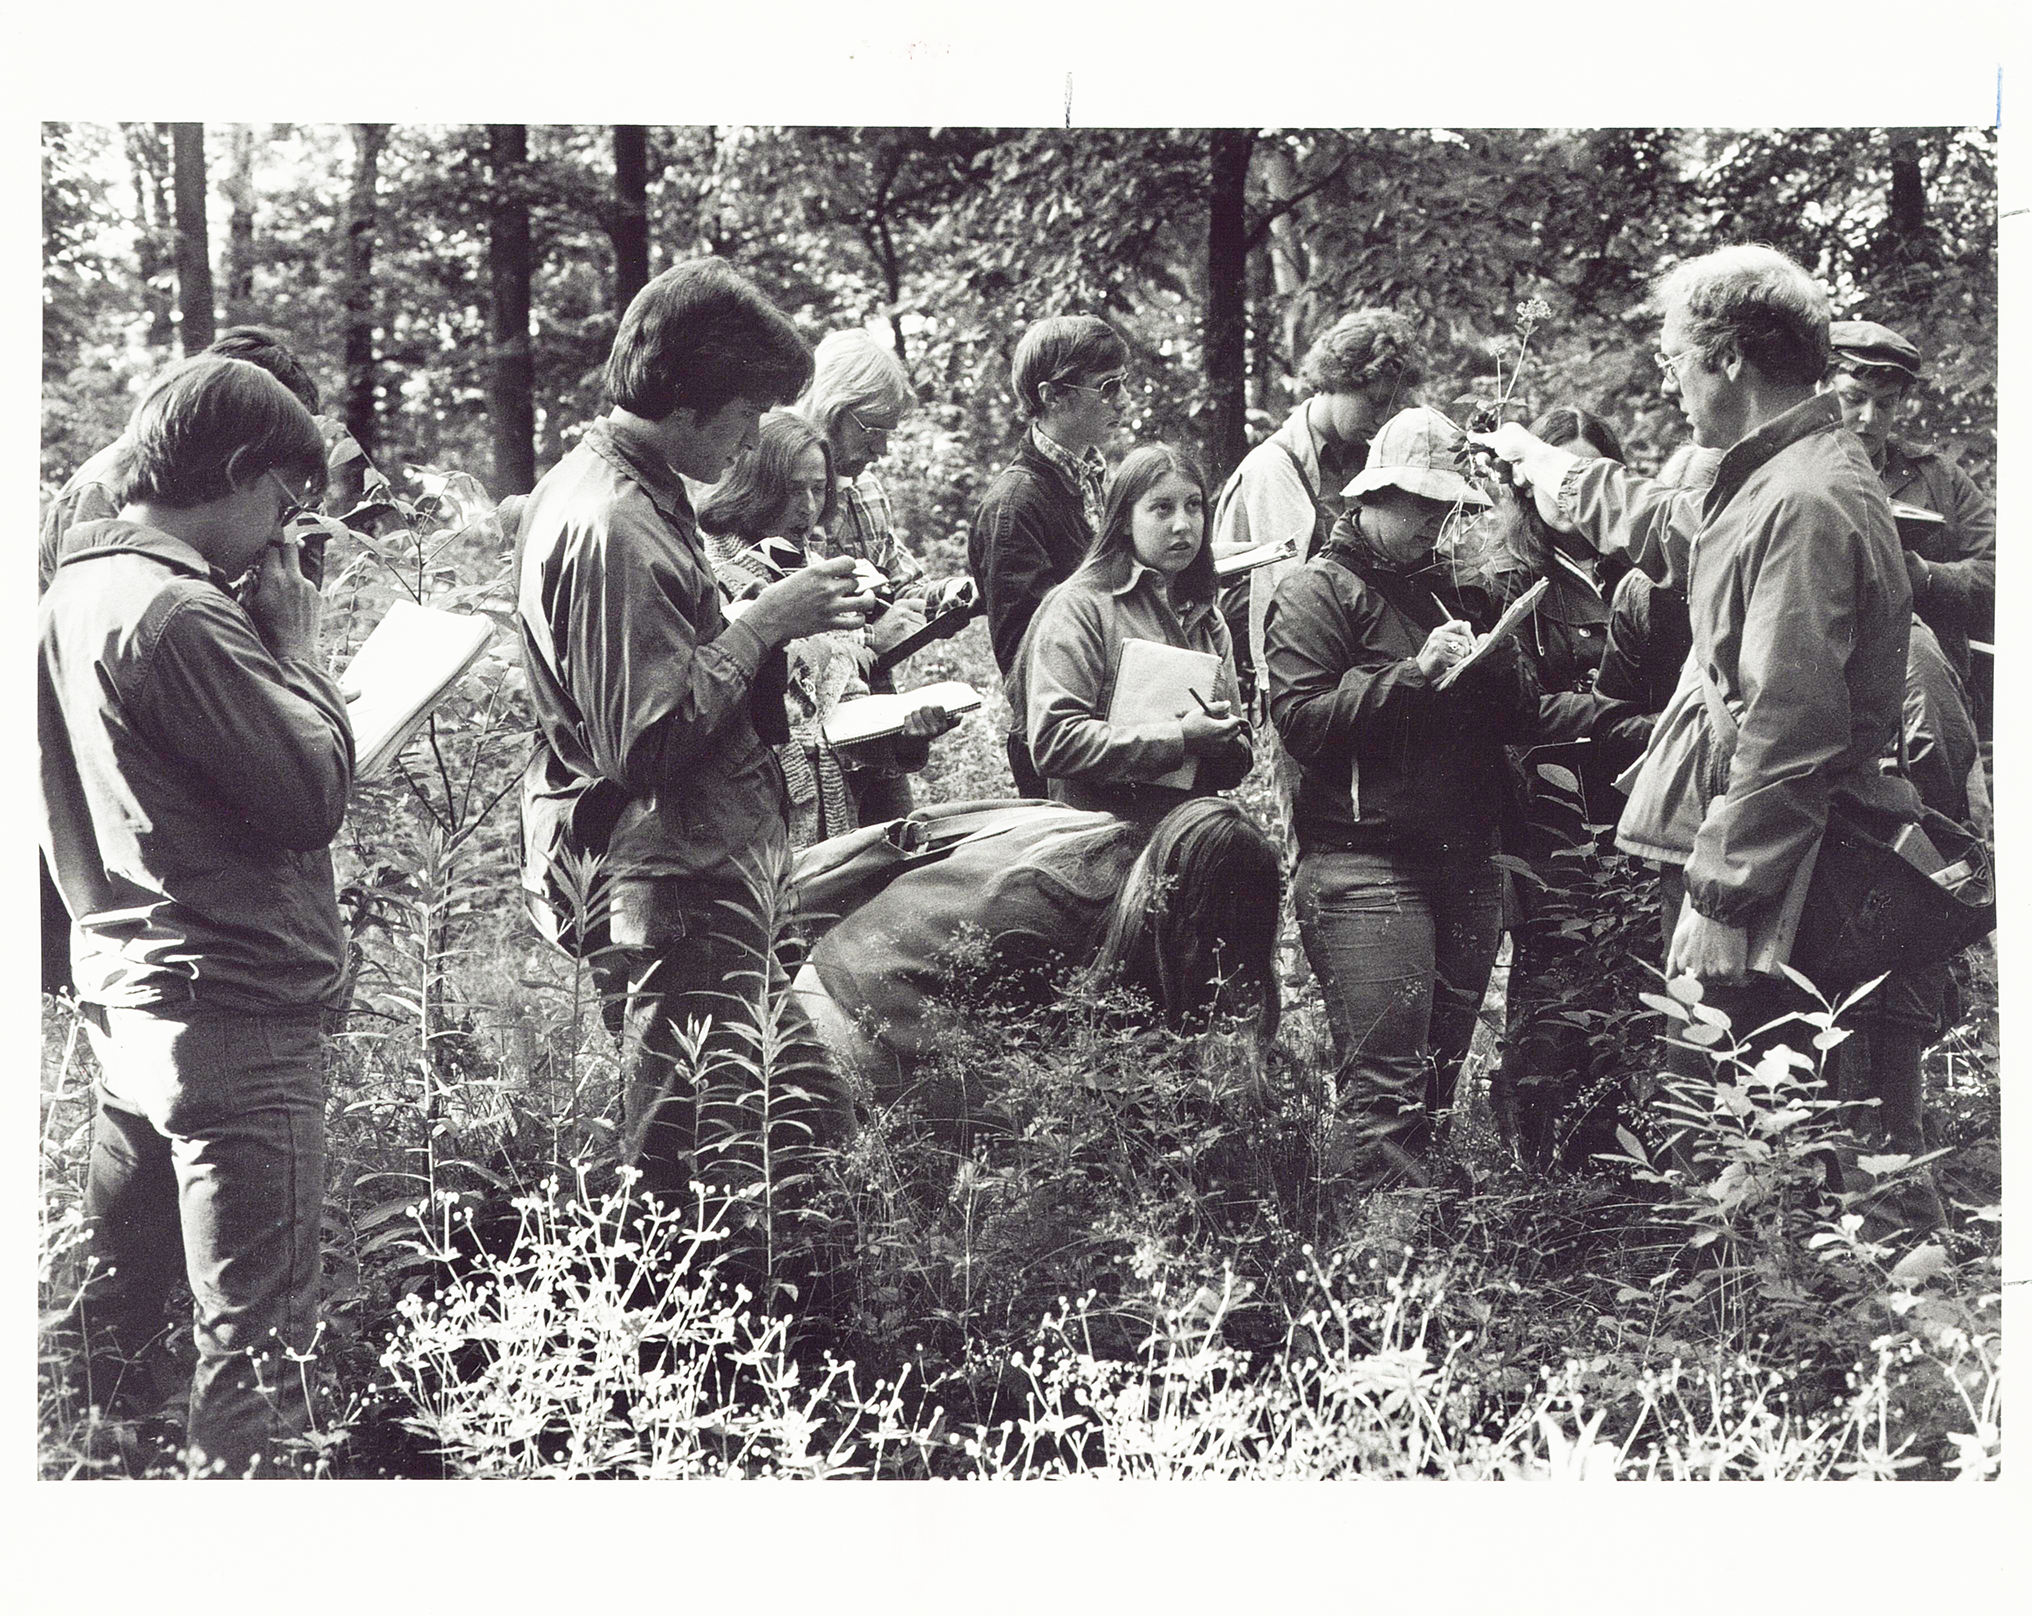 Dr. Gelderloos with students in the field